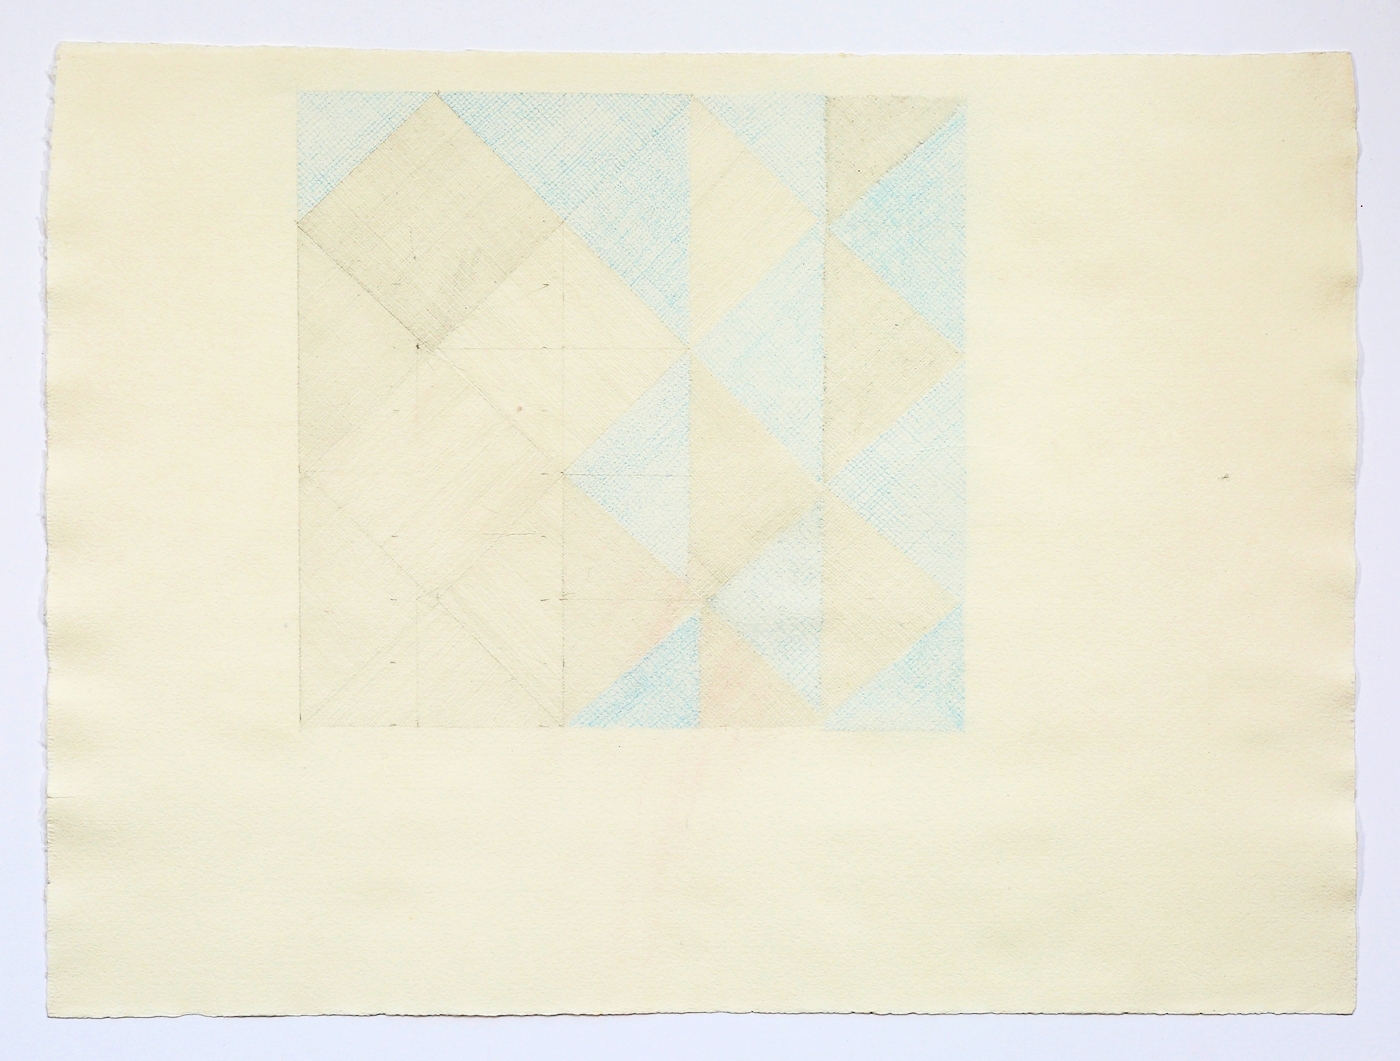  Blue and Grey Quilt Square. 2015. Pencil and Colored Pencil. 11" x 17" 